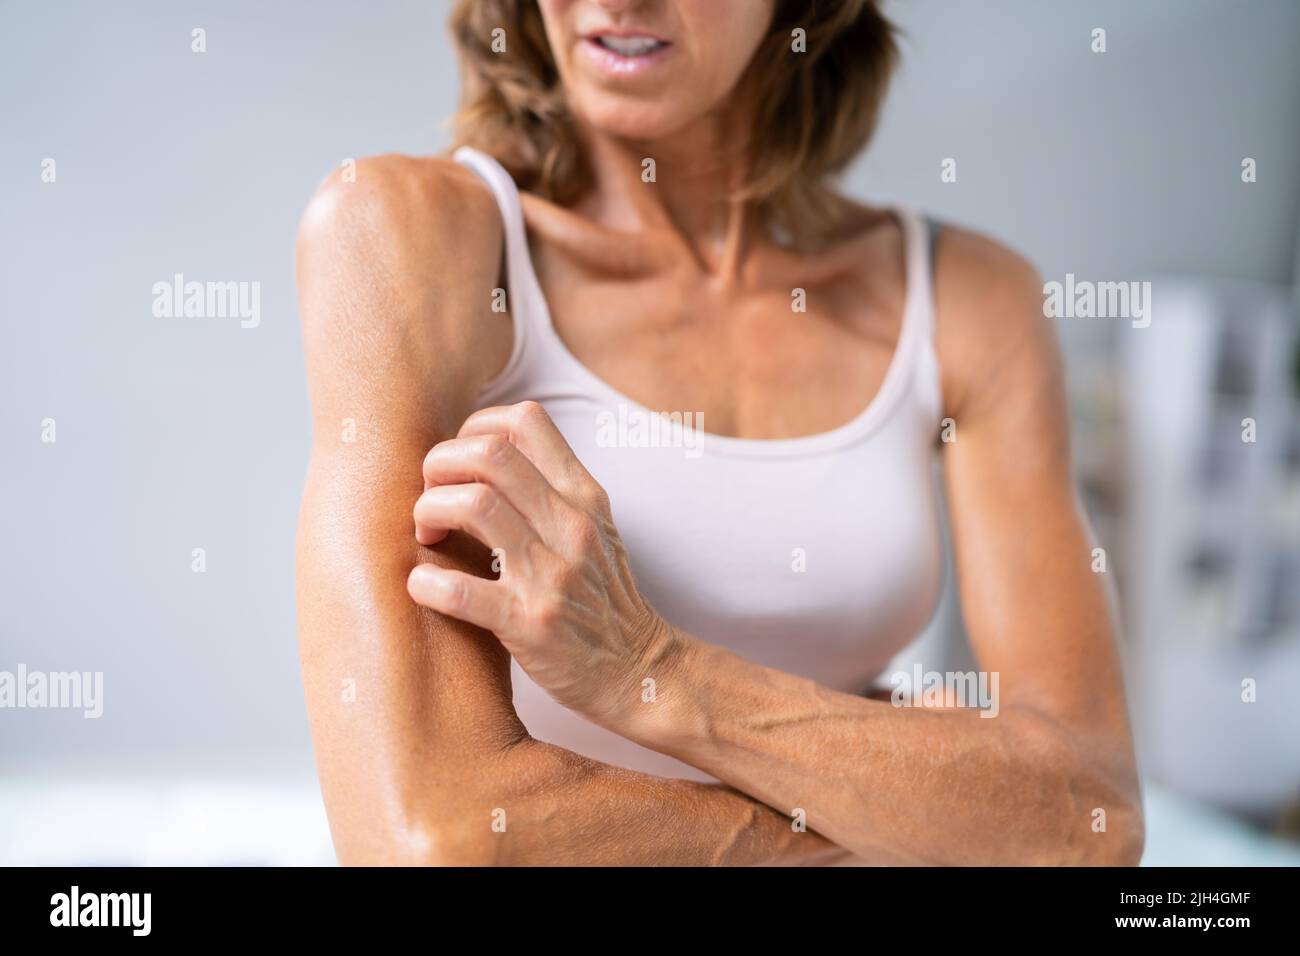 Woman With Itchy Skin. Allergy Or Psoriasis Stock Photo